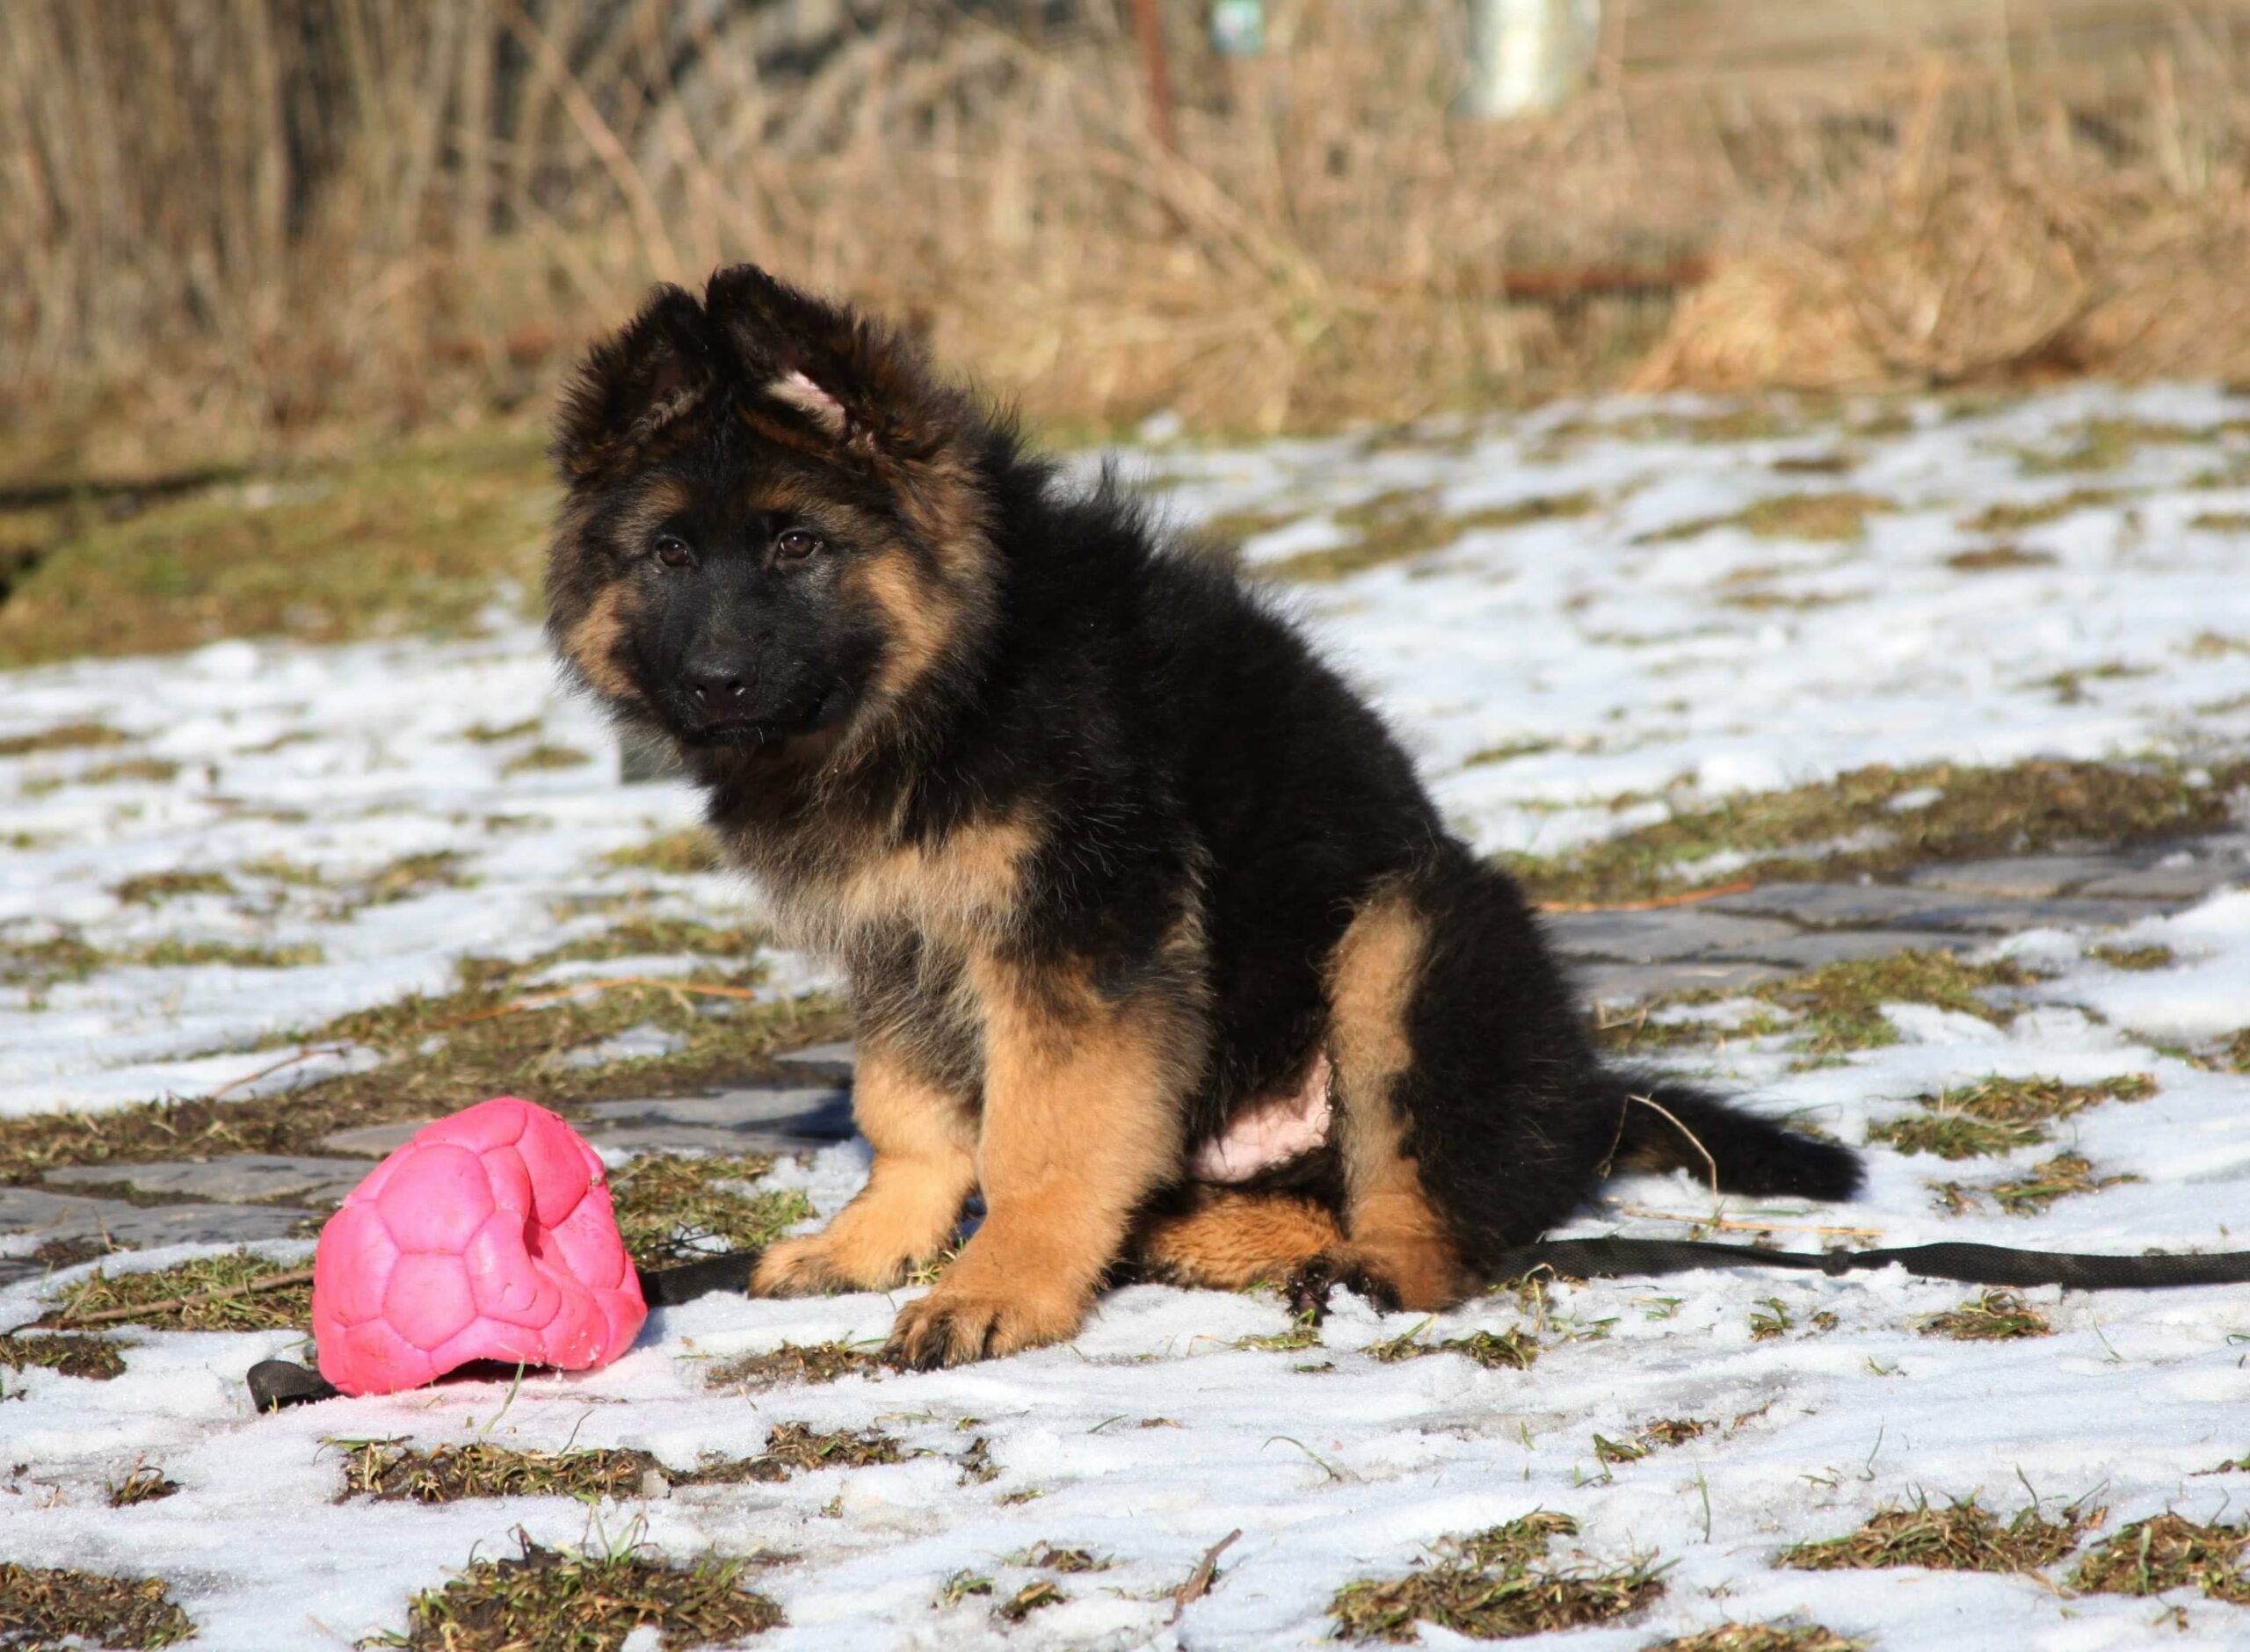 Defender Puppy looking at a ball